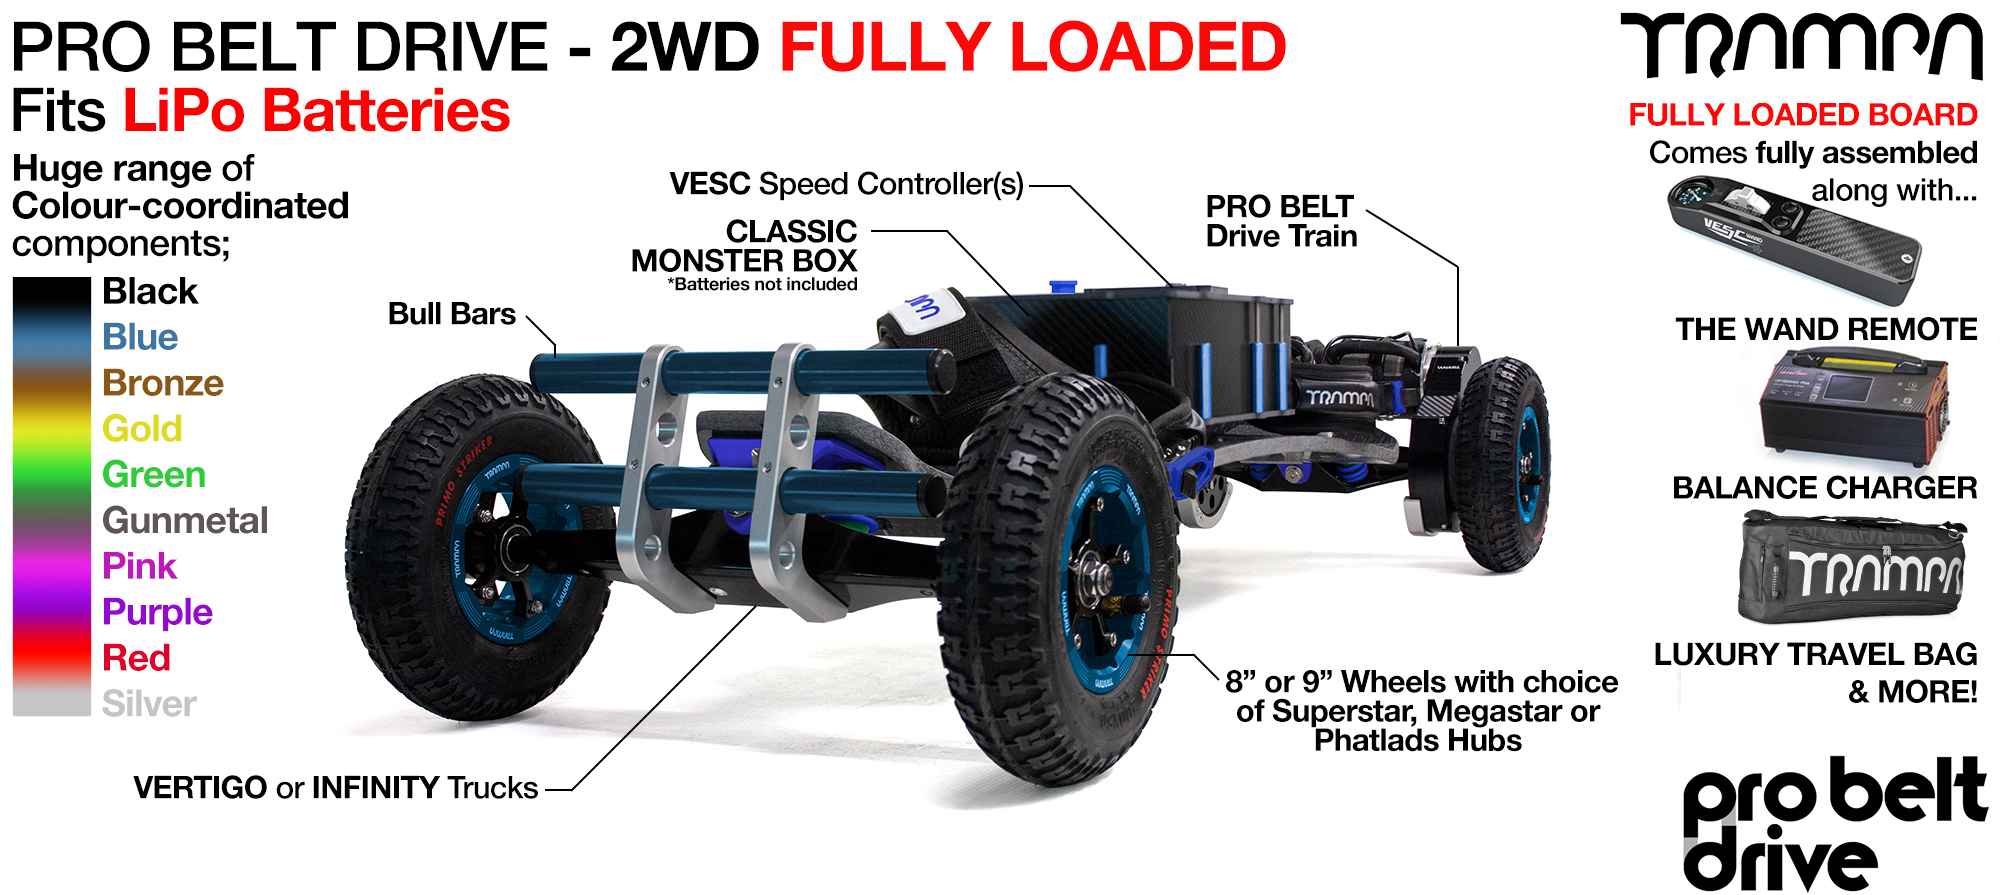 TRAMPA 16mm PRO Belt Drive Electric mountainboard FULLY LOADED DOUBLE STACK to fit 4x 20Ah Li-Po Cells with The WAND, TWIN 12s ULTRA POWER Charger & Bull Bars